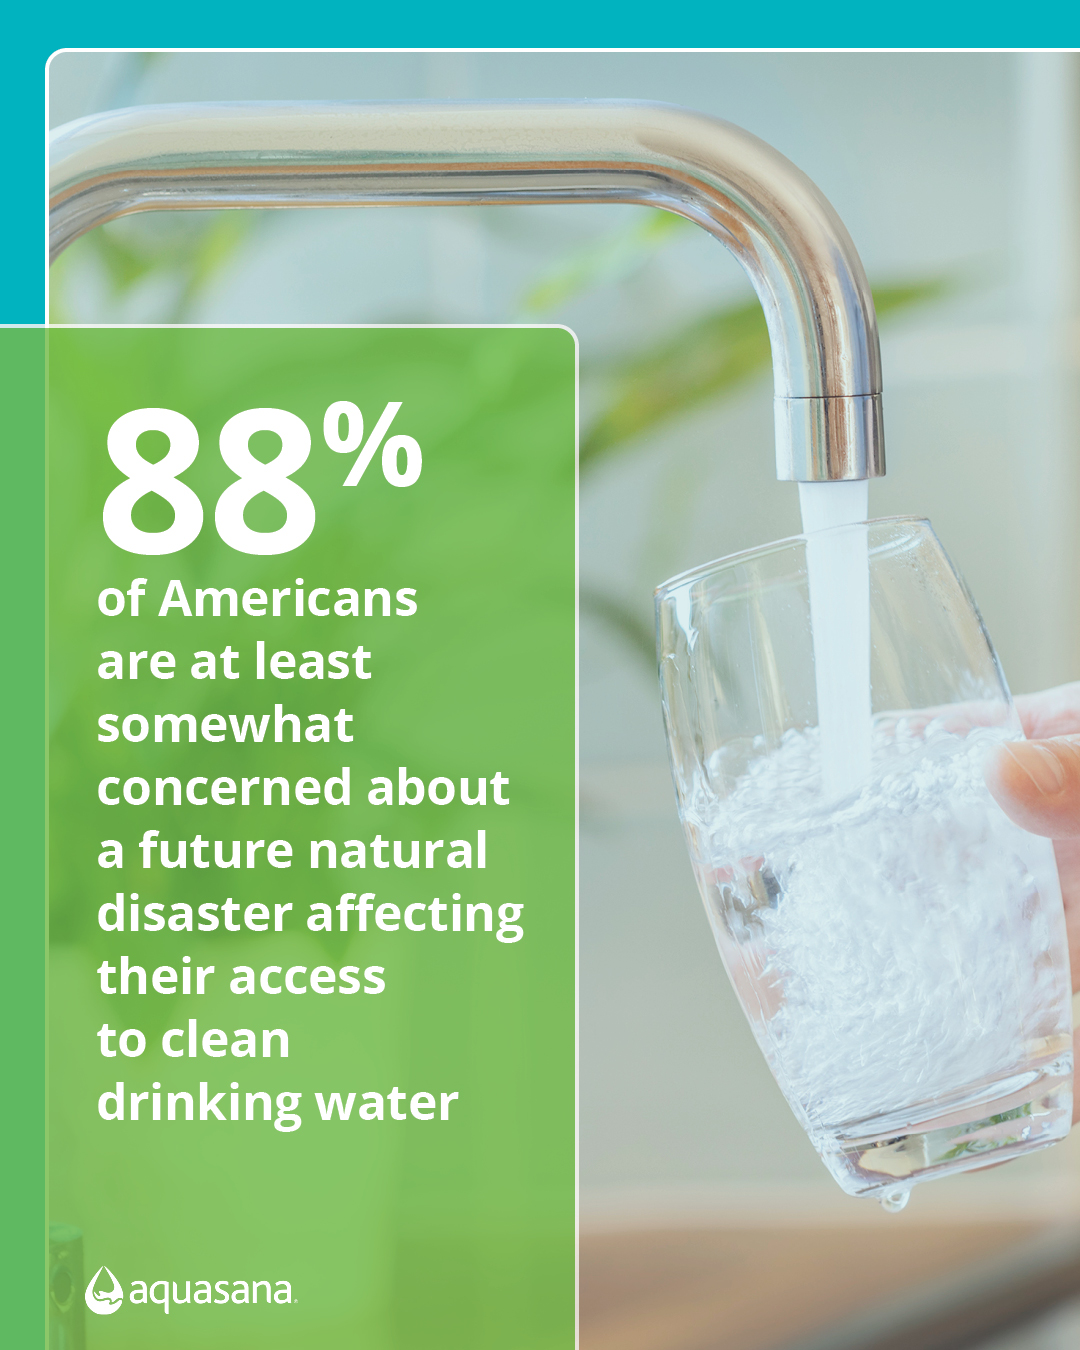 Nearly 9 in 10 Americans indicated concern about a future natural disaster affecting their access to clean drinking water.